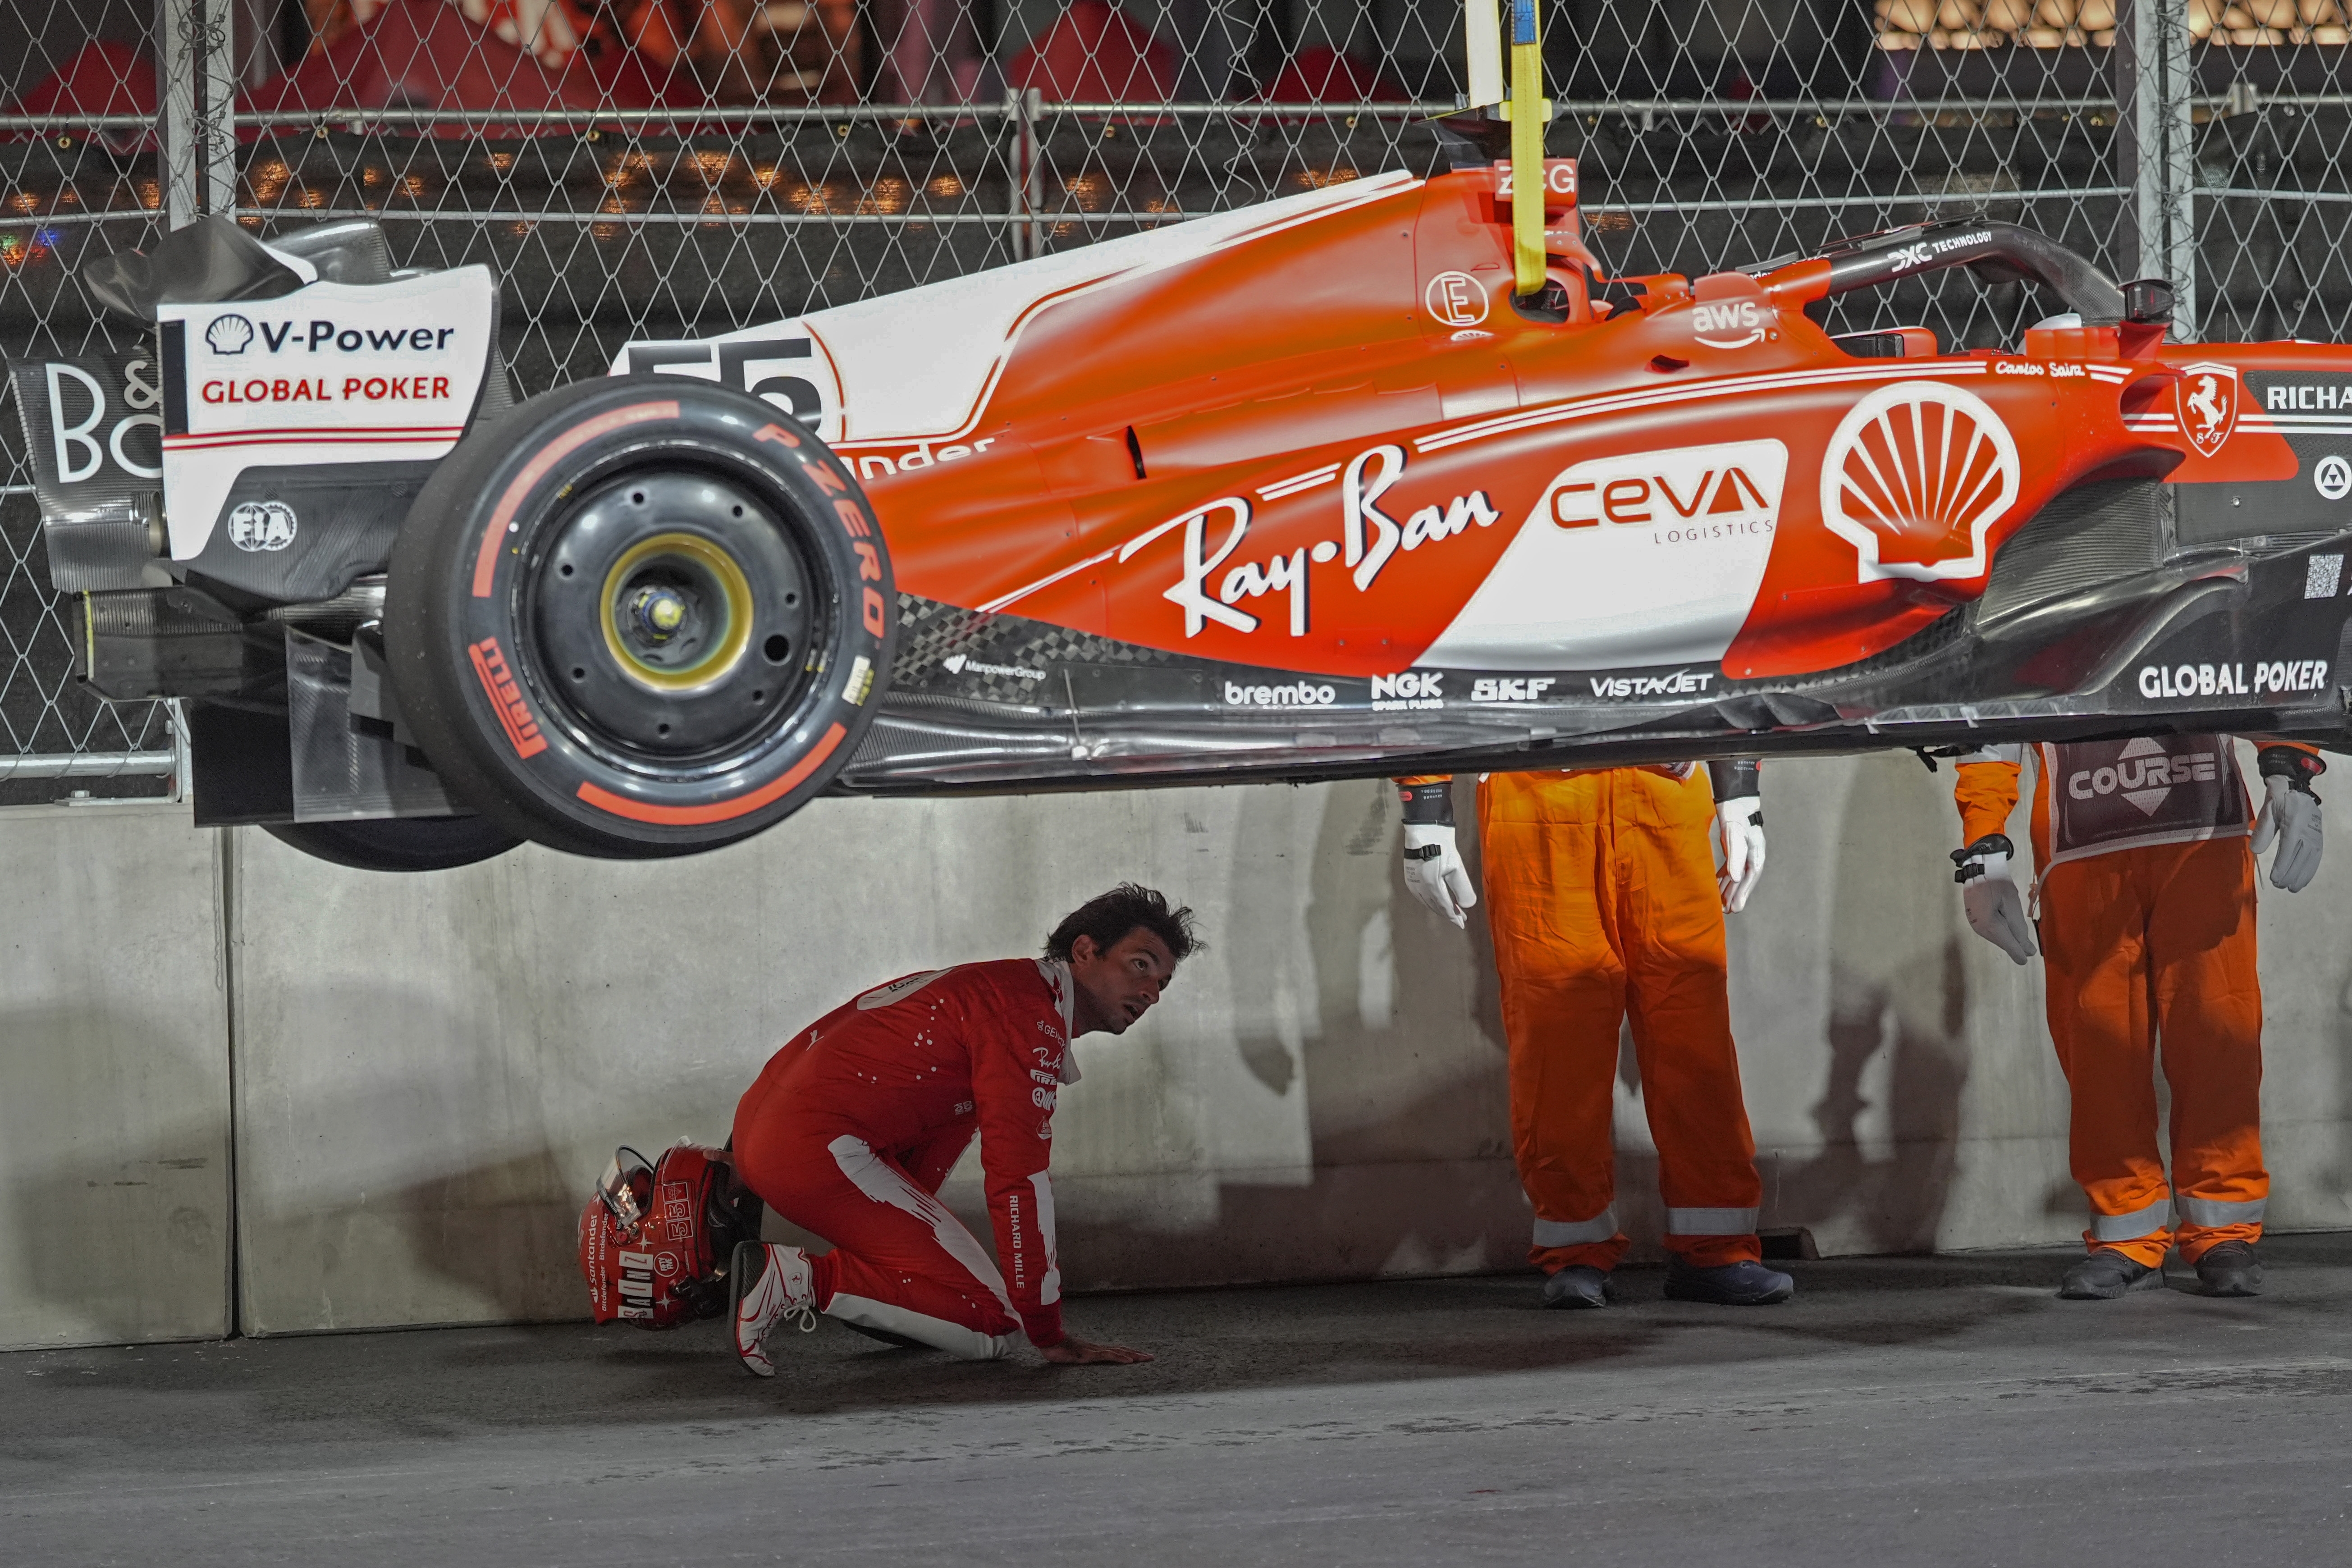 Formula One off to rough Las Vegas start. Ferrari damaged, fans told to  leave before practice ends at 4 a.m.